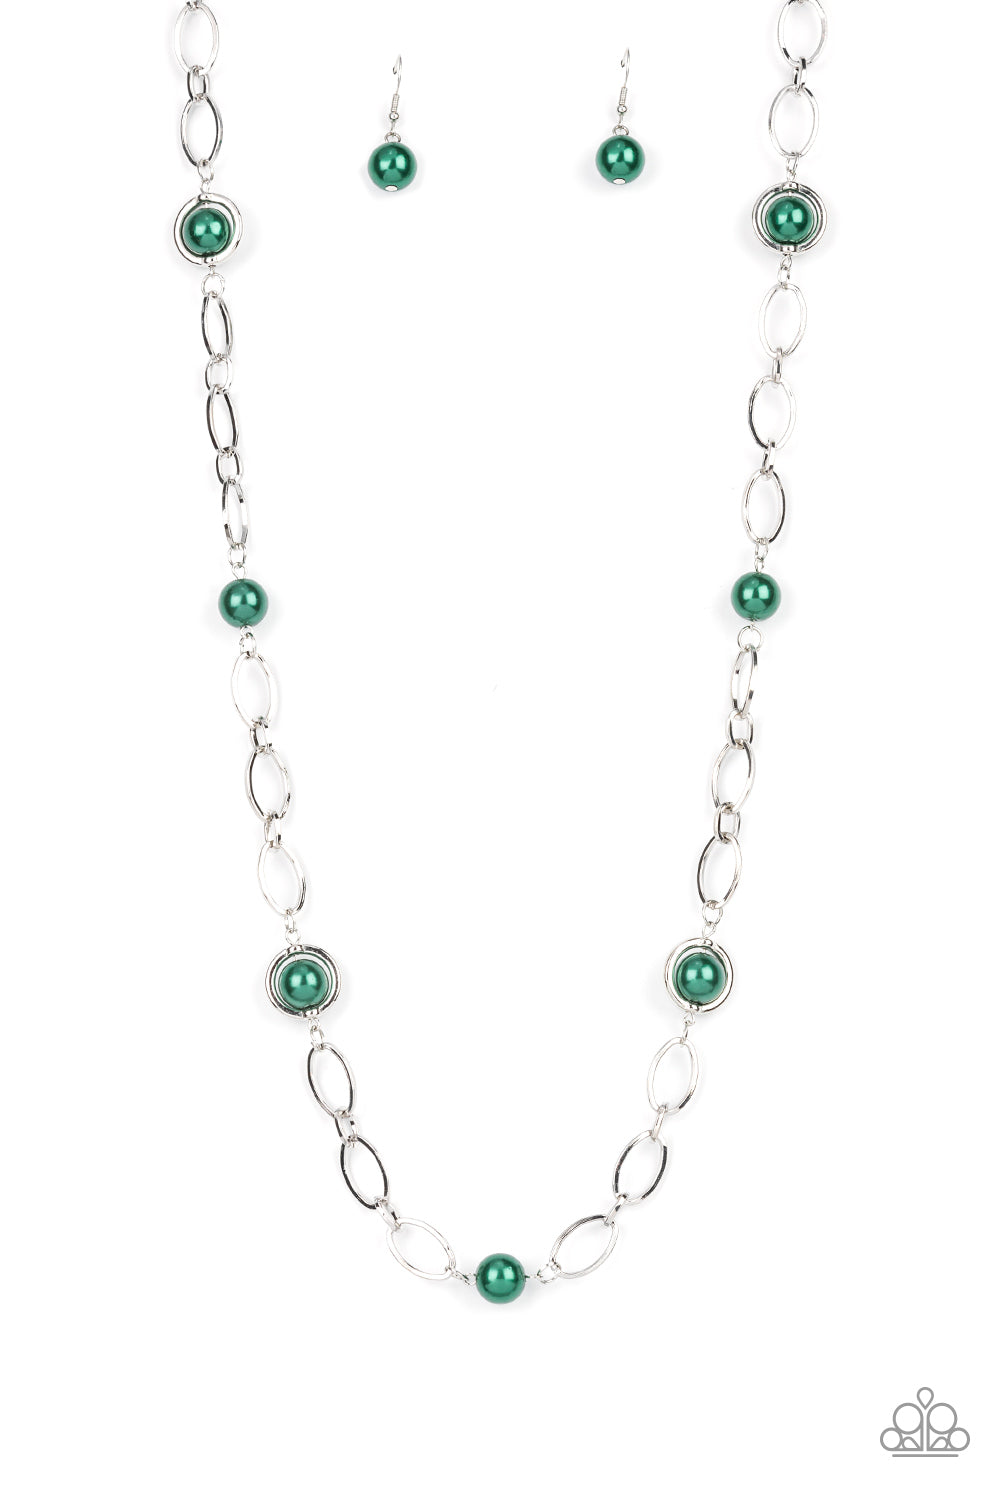 Fundamental Fashion - Green Emerald Pearl and Silver Necklace - Paparazzi Accessories - Sections of oversized silver chain links and bubbly Emerald pearls delicately connect across the chest, resulting in a refined display. Features an adjustable clasp closure. Sold as one individual unique fashion necklace.